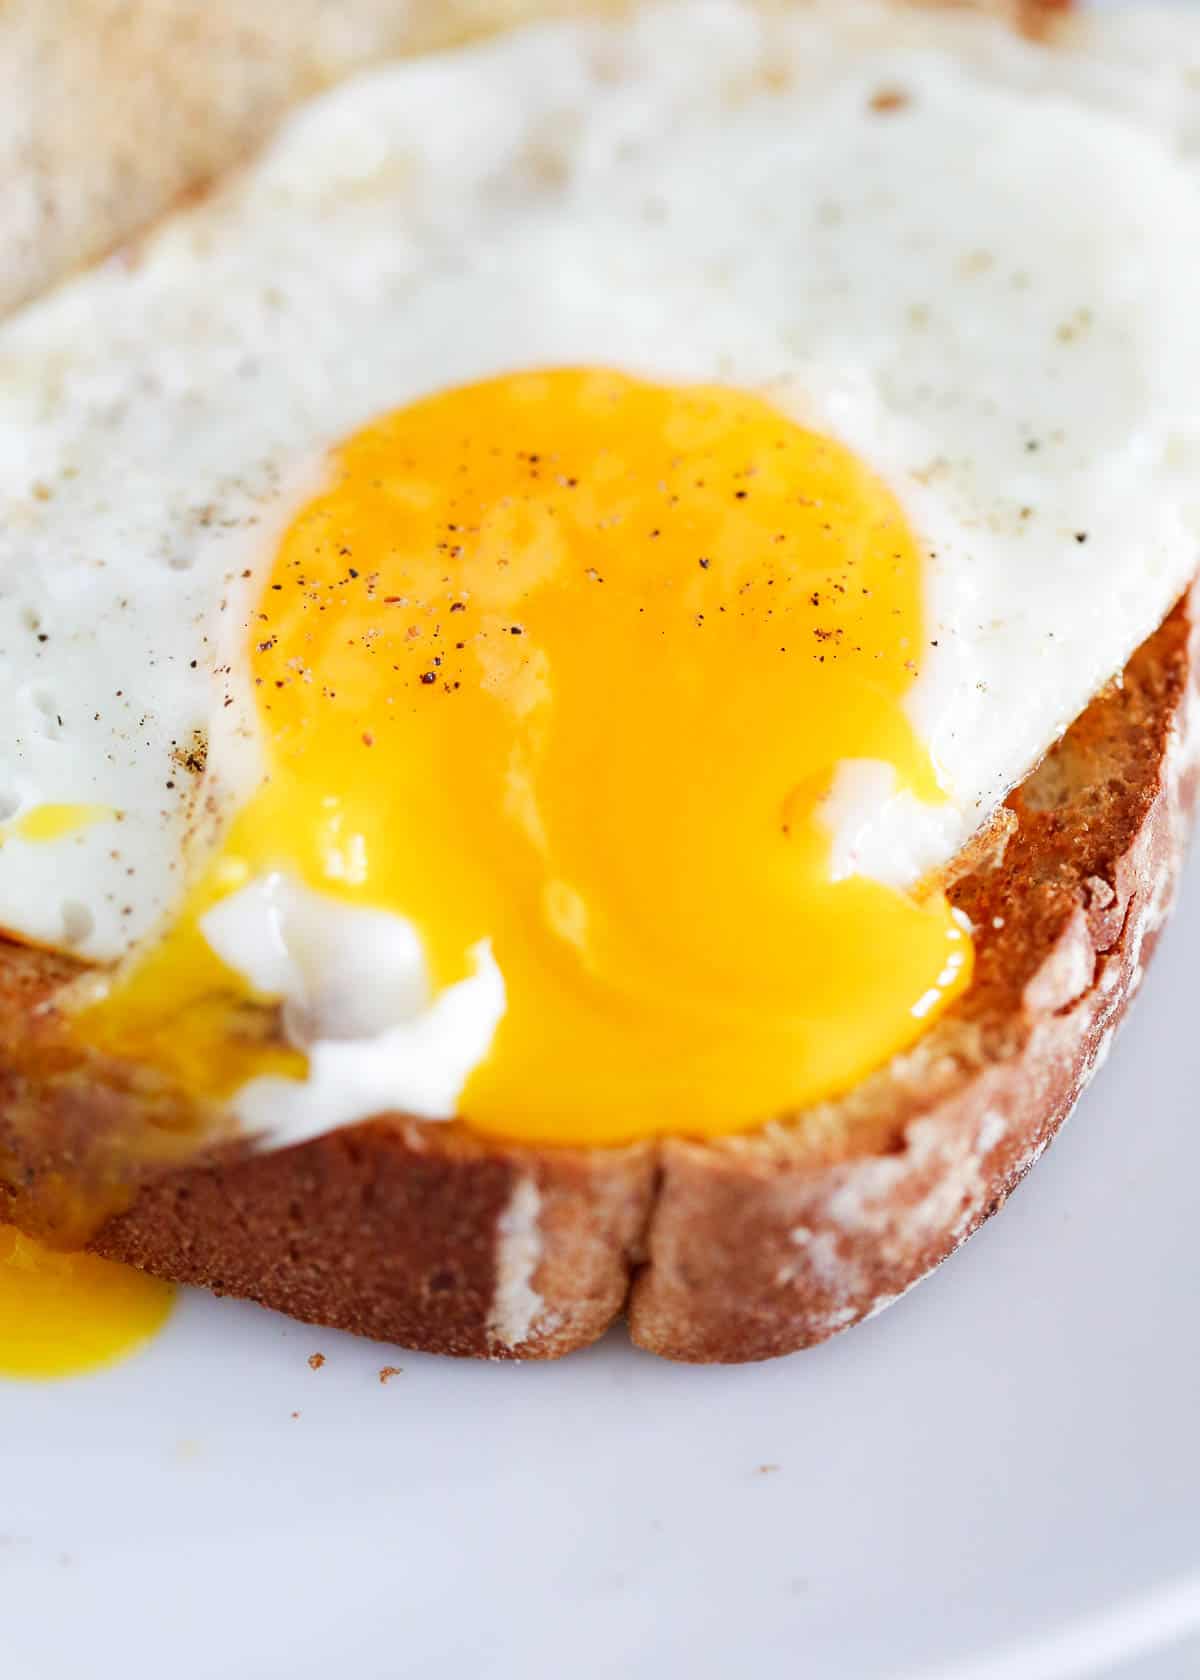 Cut open sunny side up egg on toast.